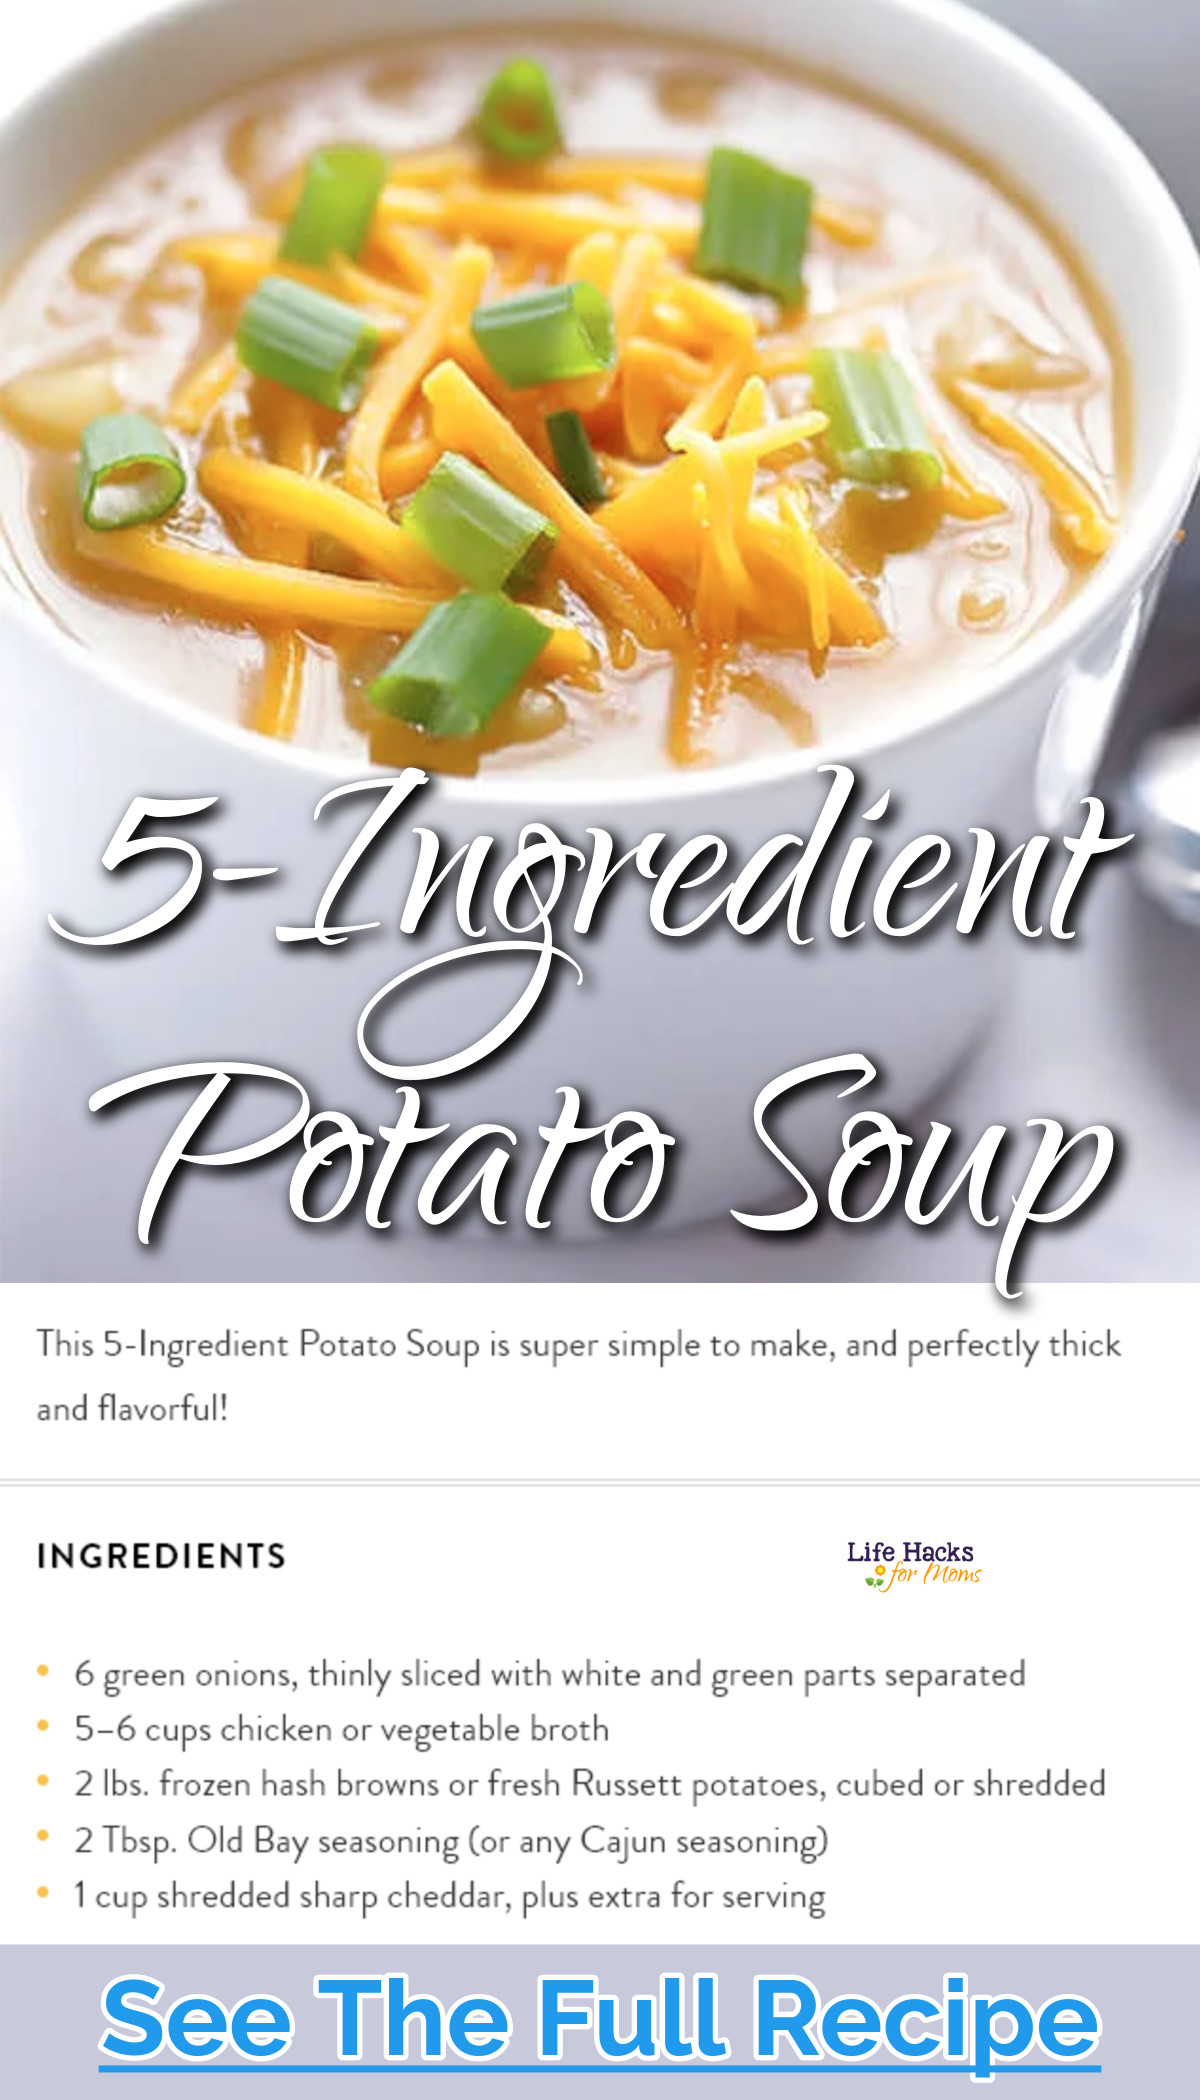 easy soup recipes to make ahead and freeze - 5 ingredient potato soup